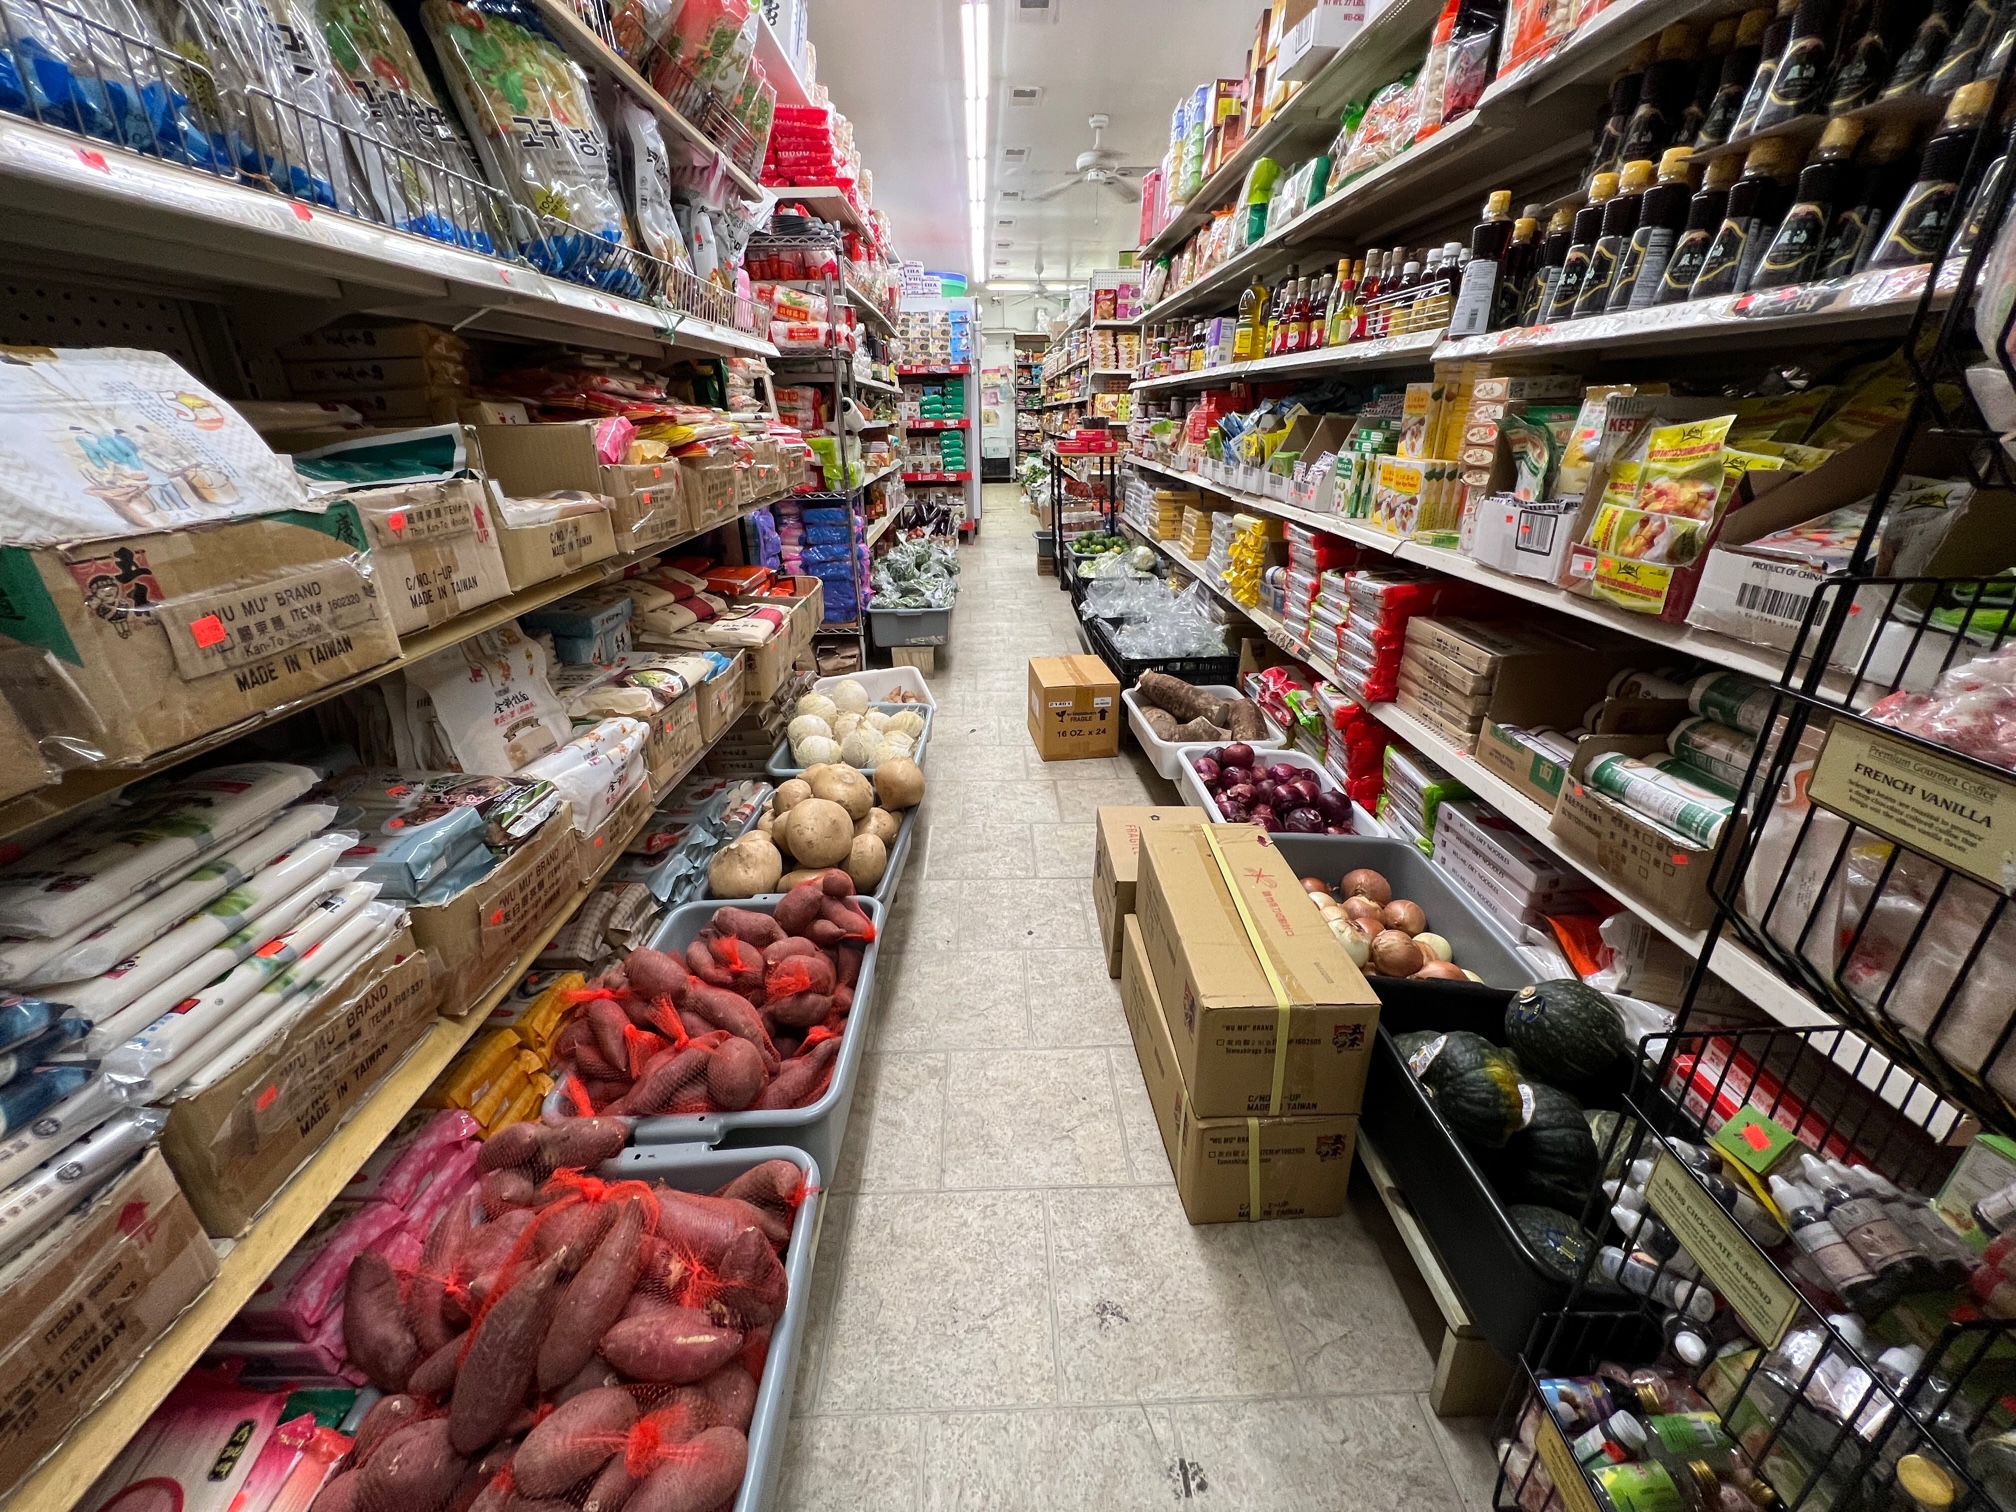 Inside Far East Grocery, there are shelves of products and boxes of produce on the floor. Photo by Alyssa Buckley.